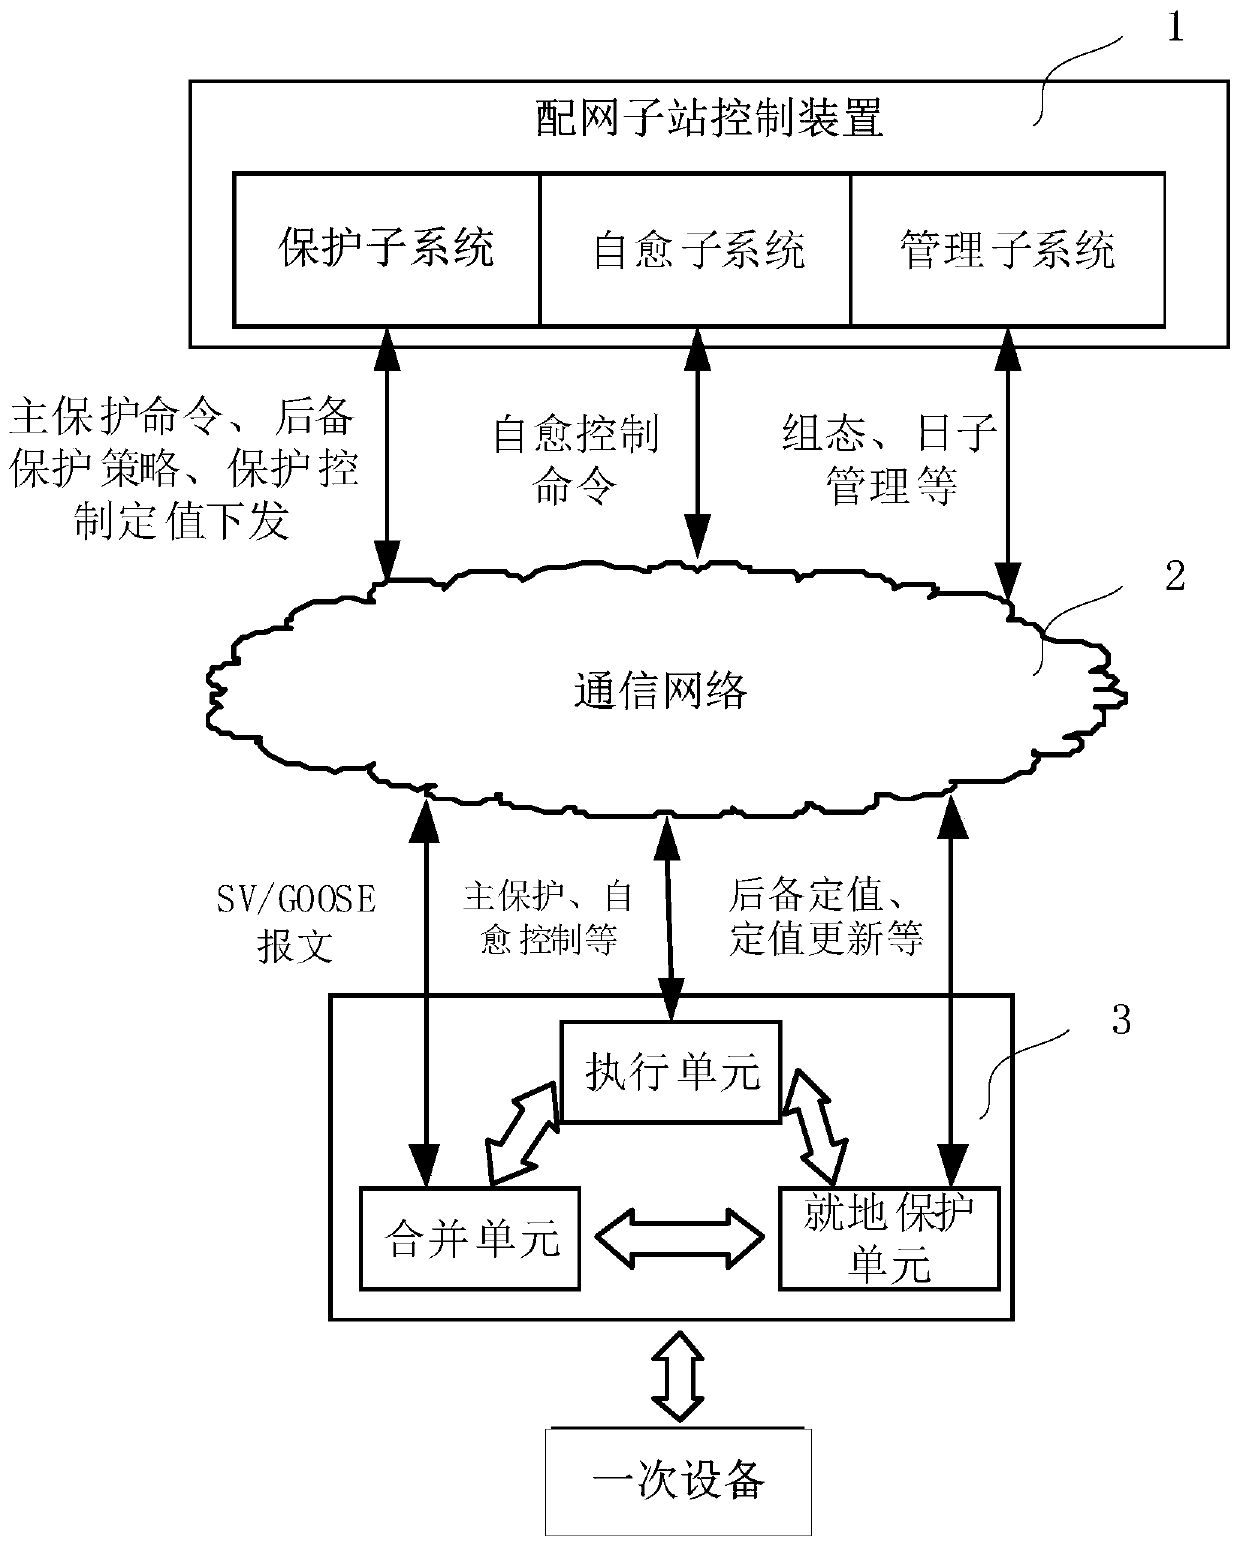 A network-based adaptive backup protection control method for distribution network